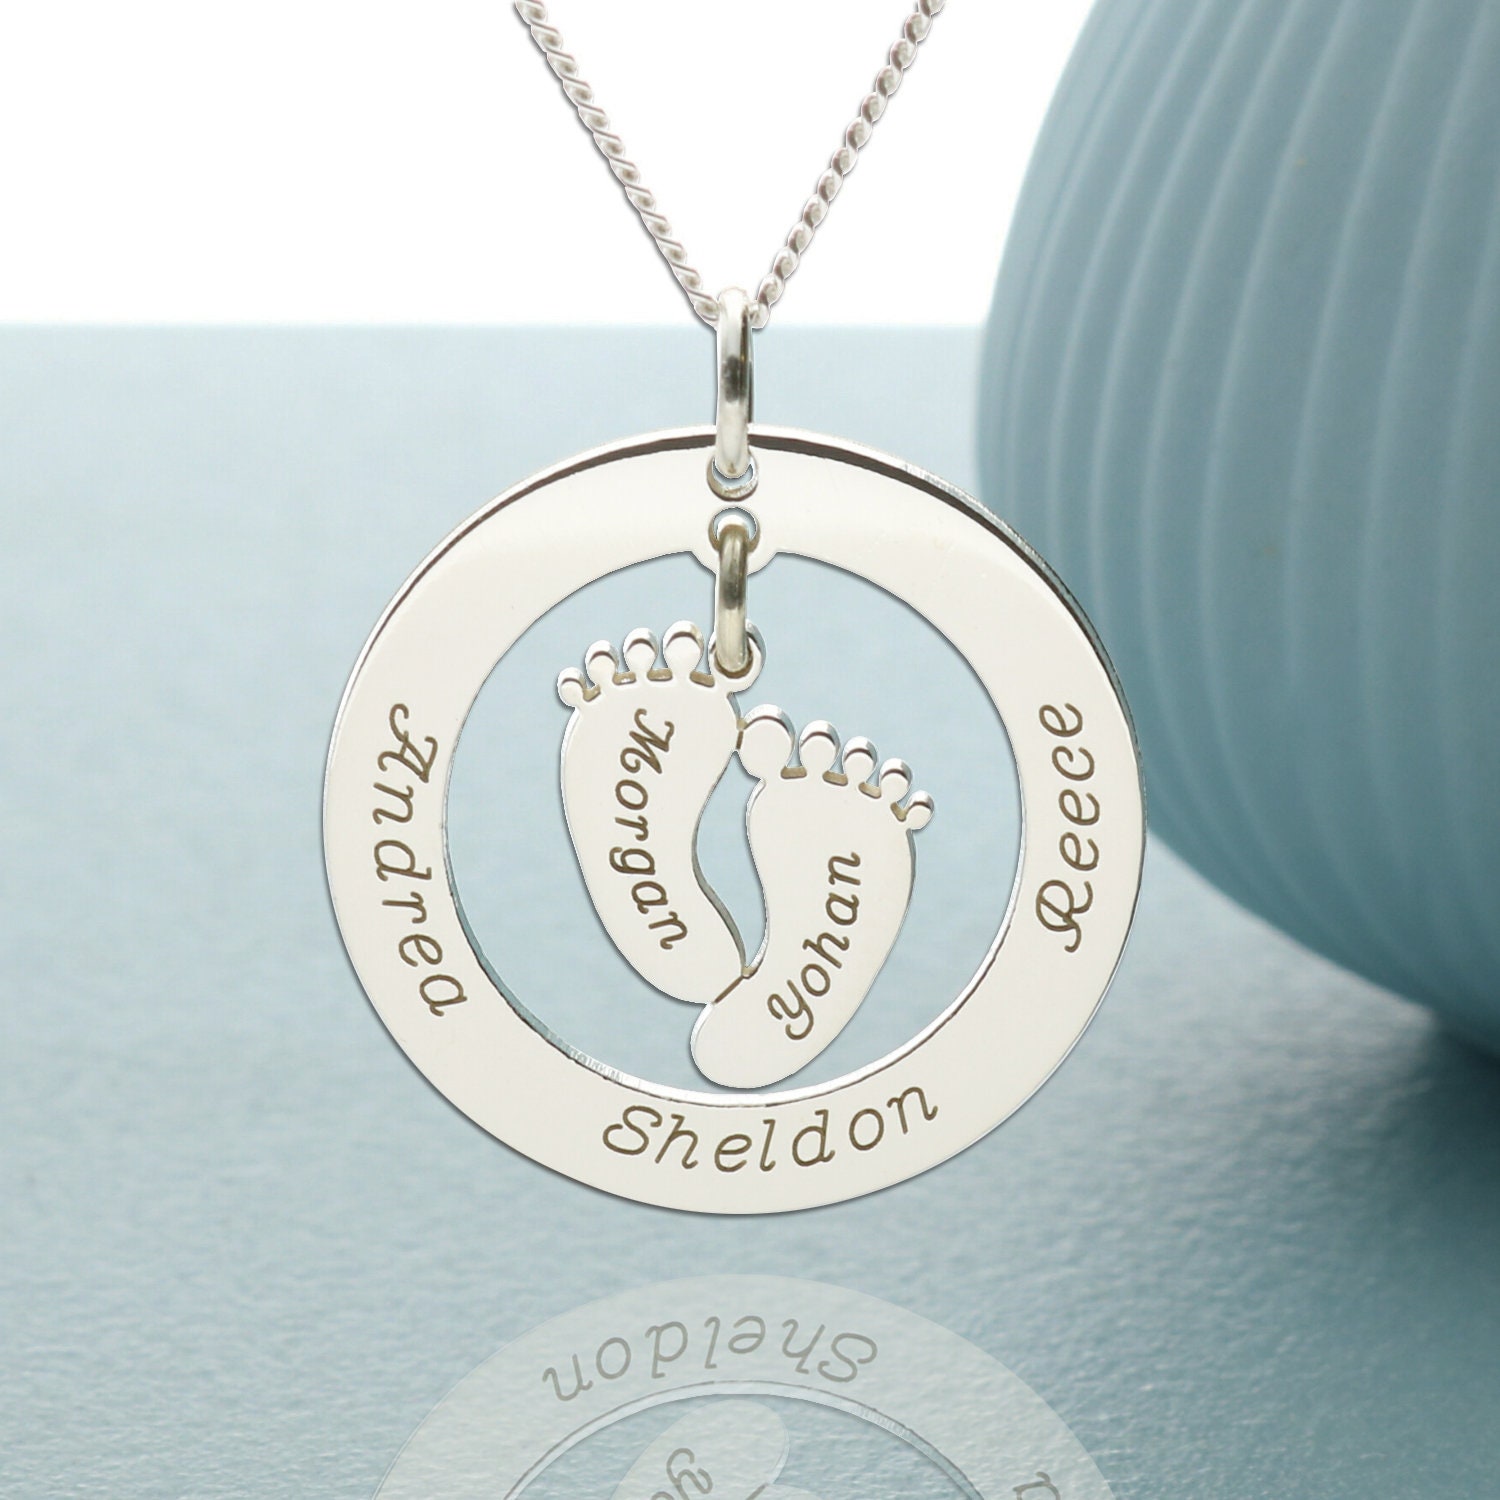 Custom Footprint and Engraved Name Necklace – Brent&Jess Fingerprint  jewelry- made with your fingerprints